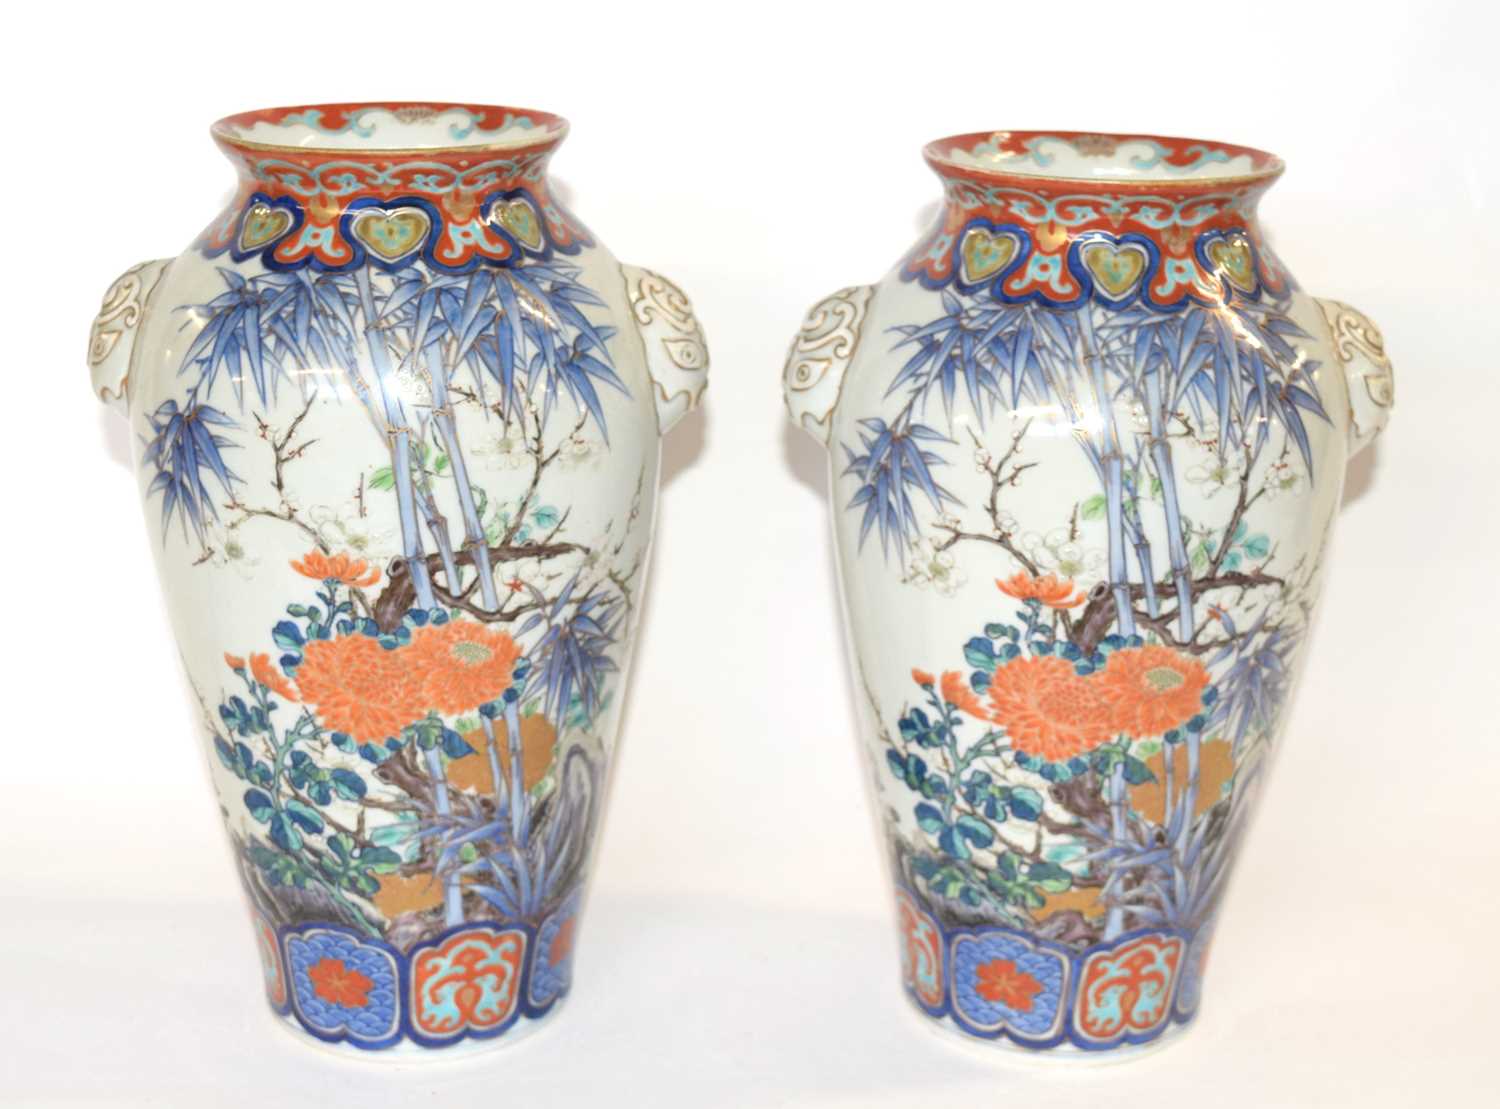 A pair of Japanese porcelain vases Meiji period with polychrome decoration of flowers and birds (